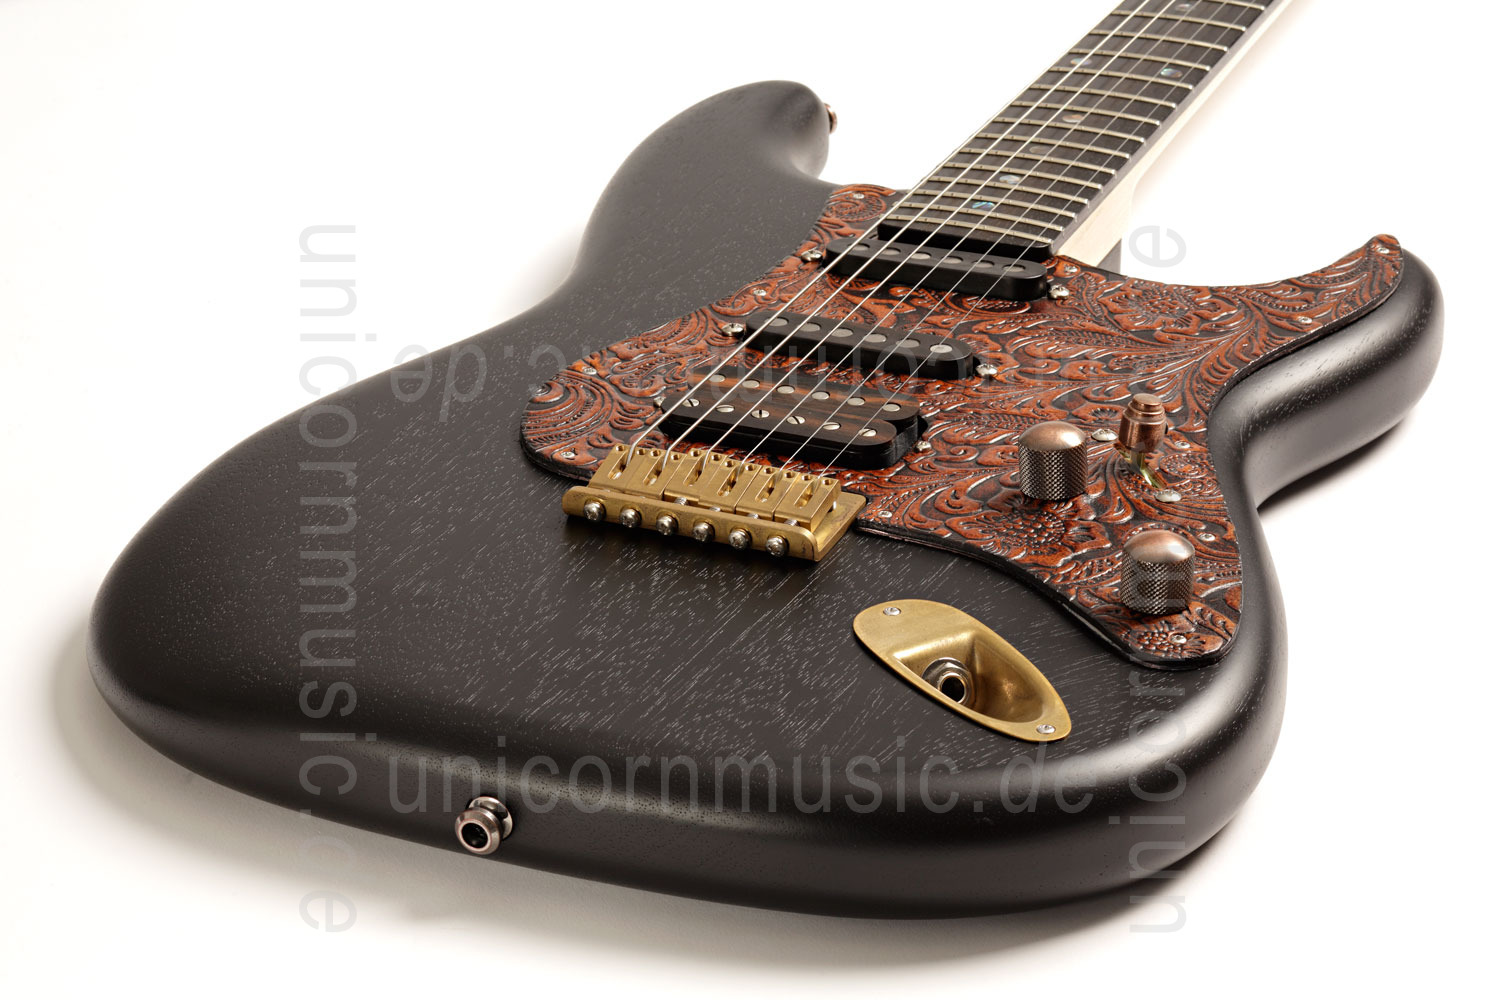 to article description / price Electric Guitar BERSTECHER Vintage 2018 - Black / Floral Amber + hard case - made in Germany